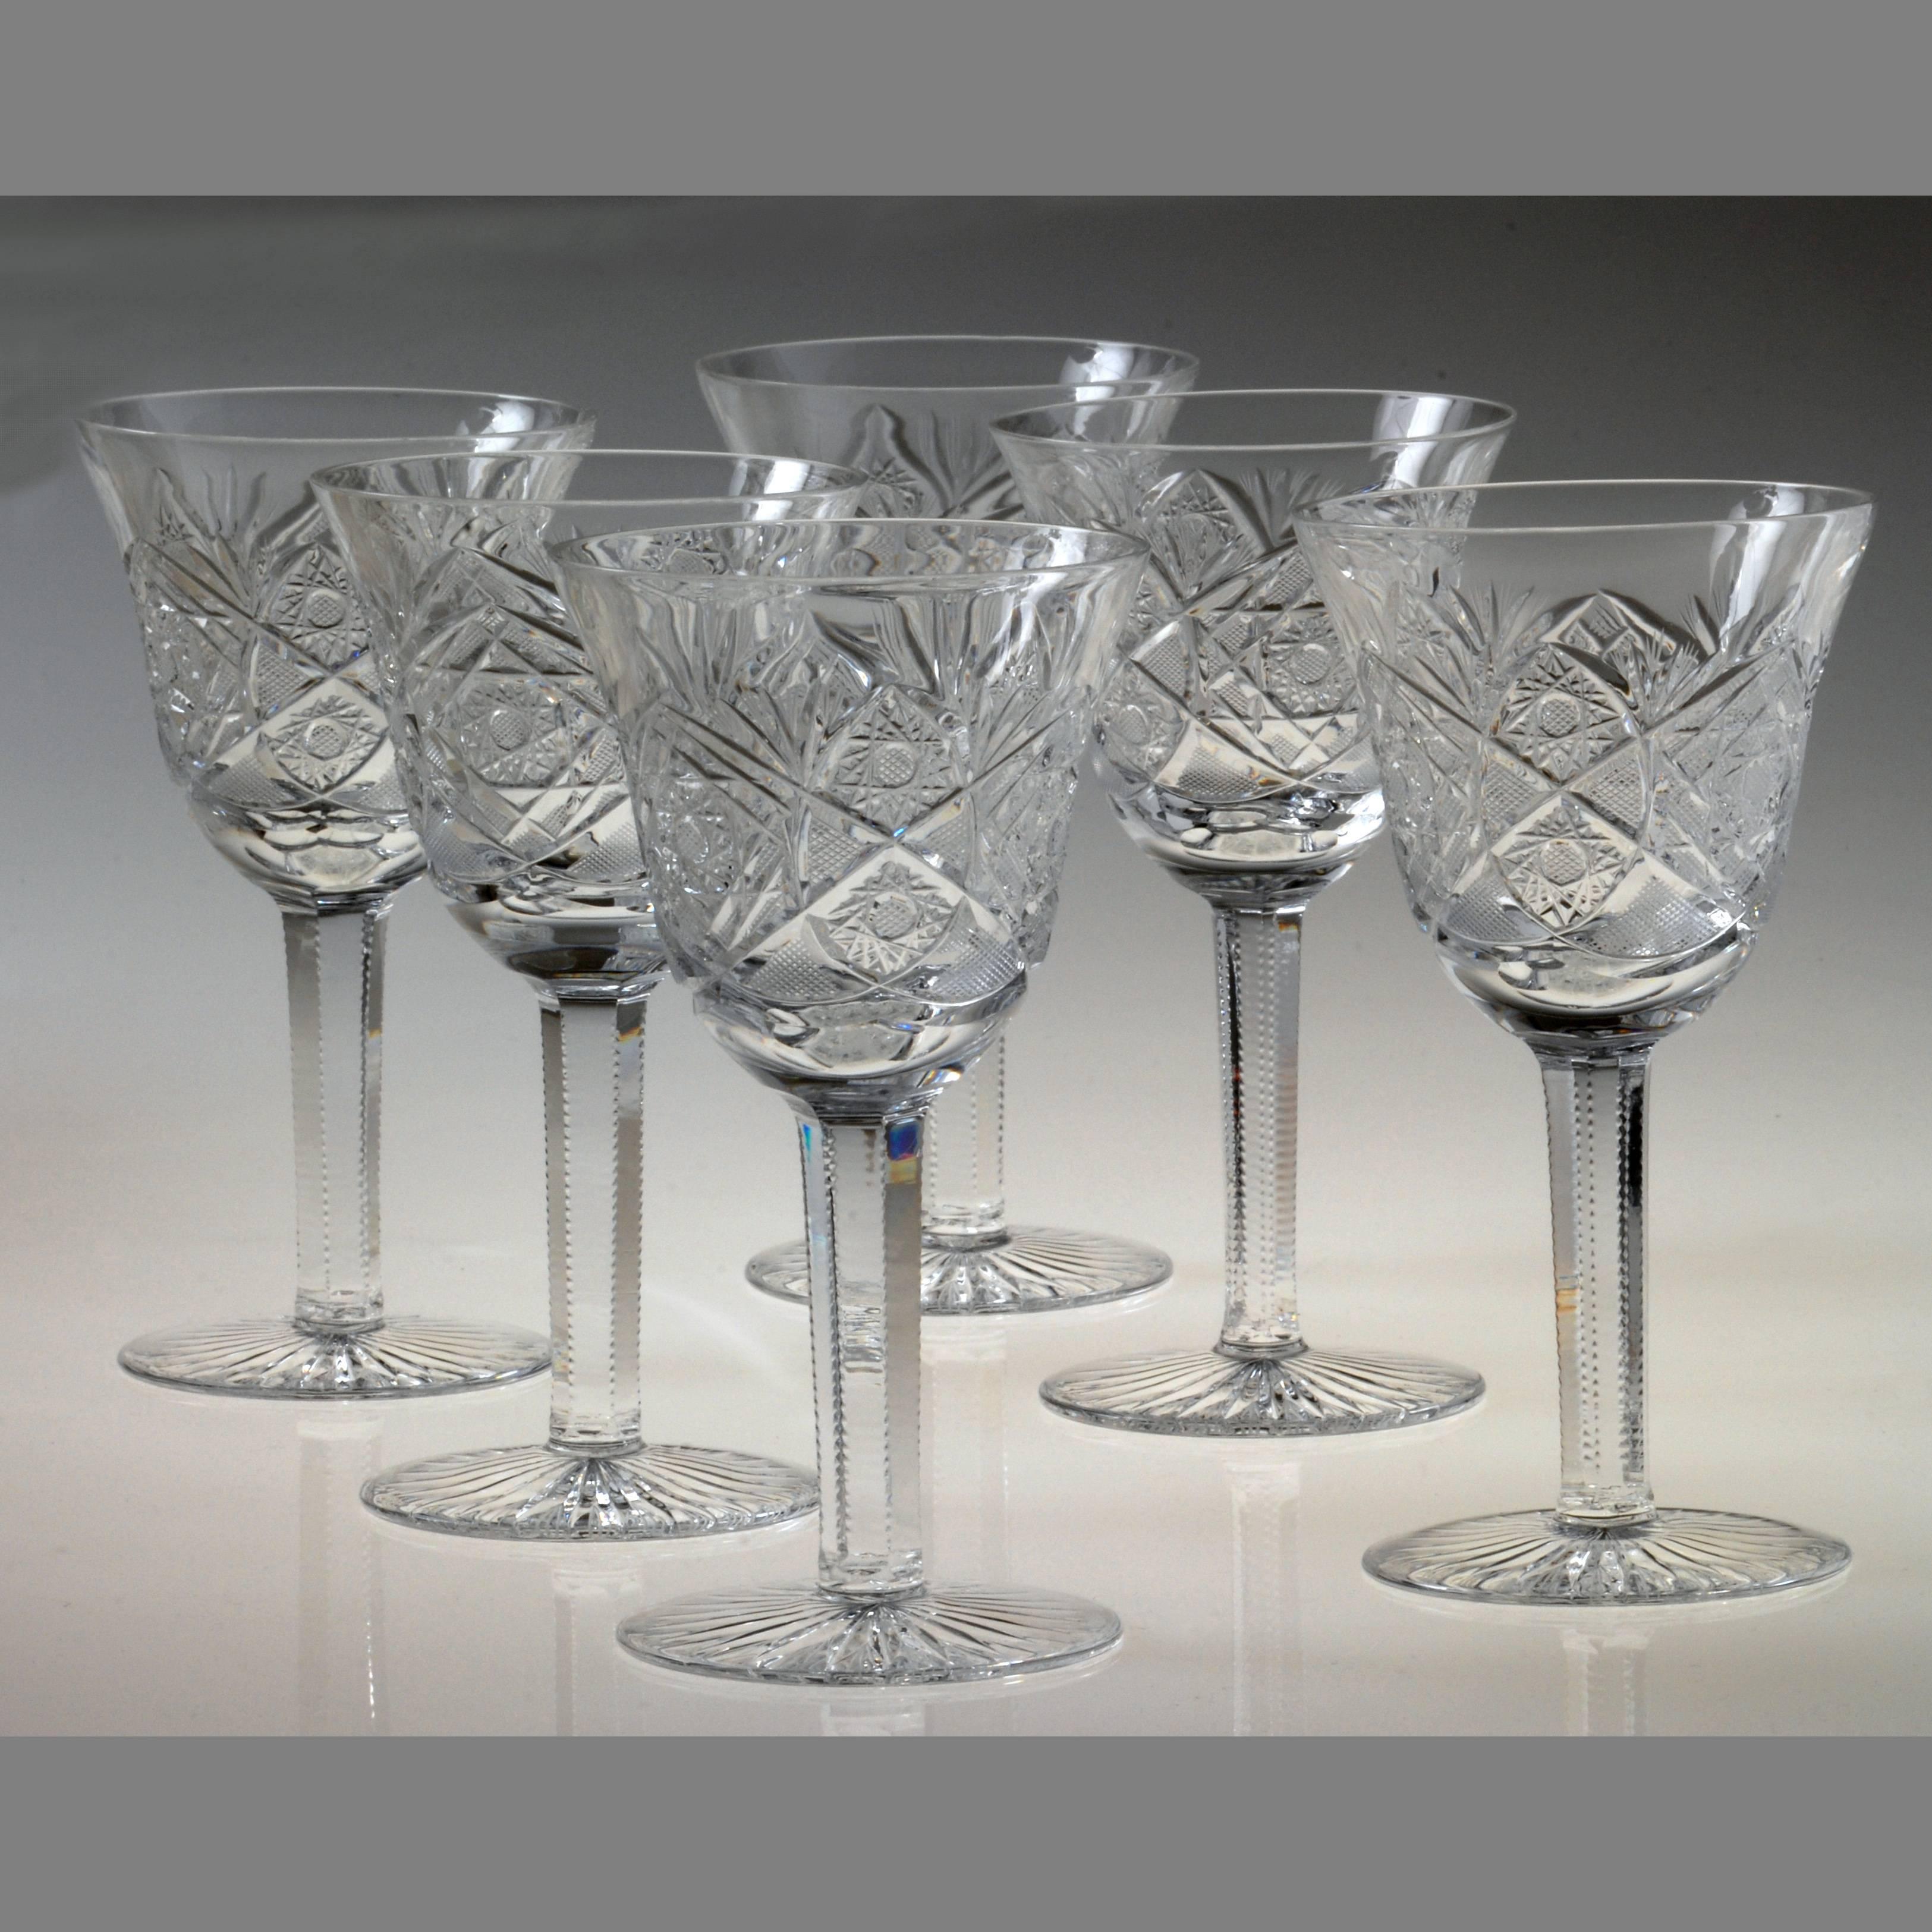 Mid-Century Modern 24 Pieces Crystal Drinking Set by Moser, Czech Republic, 1960